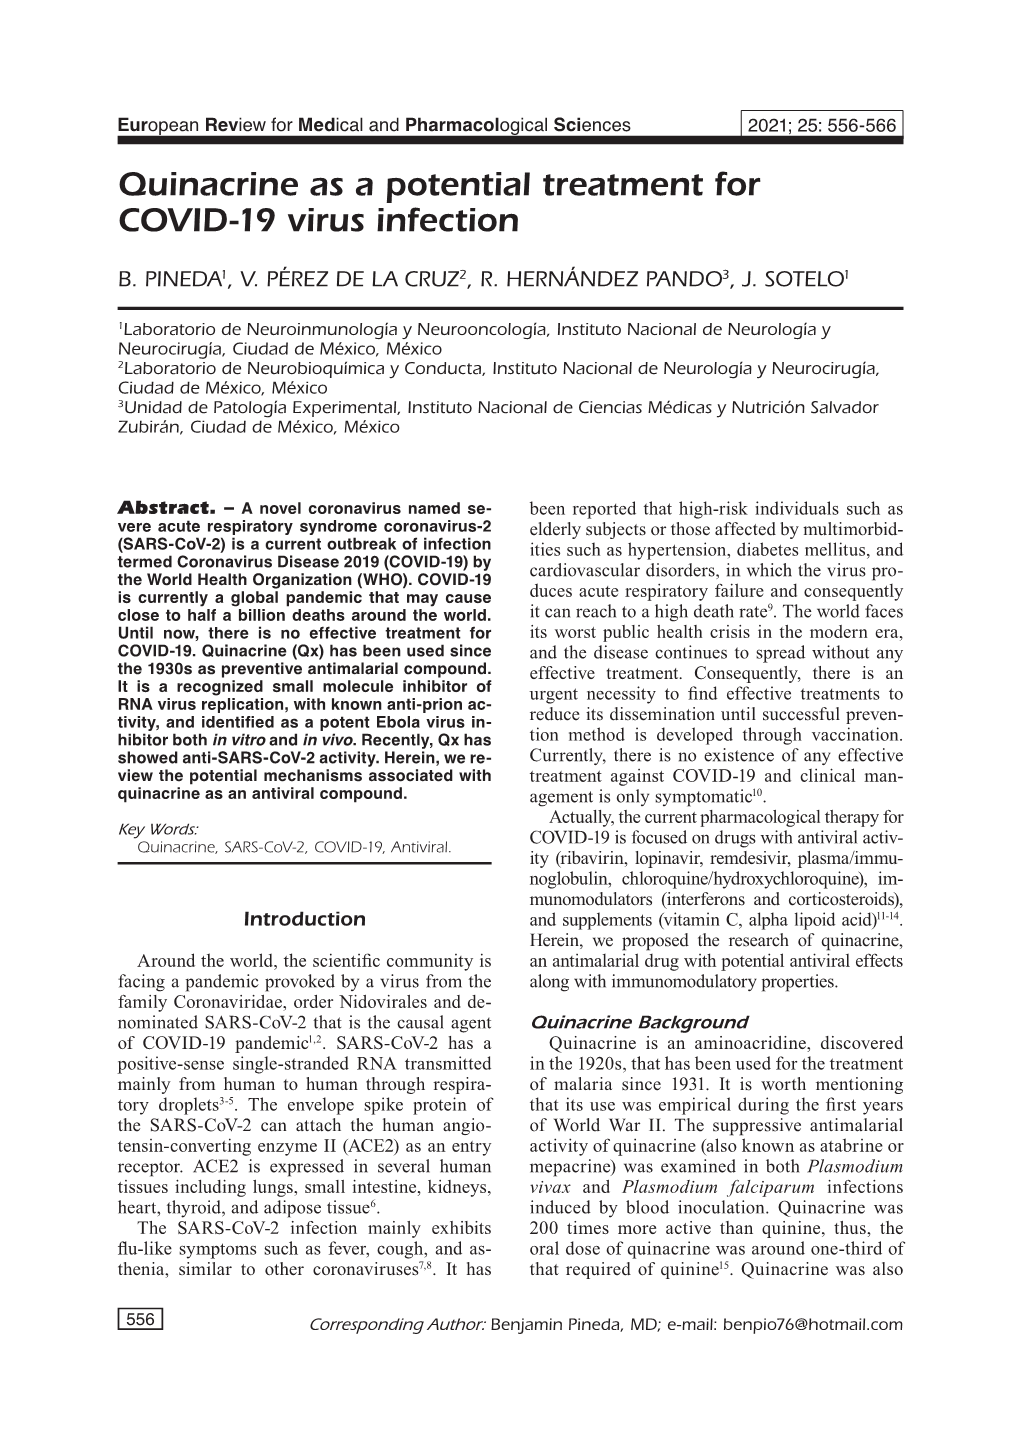 Quinacrine As a Potential Treatment for COVID-19 Virus Infection